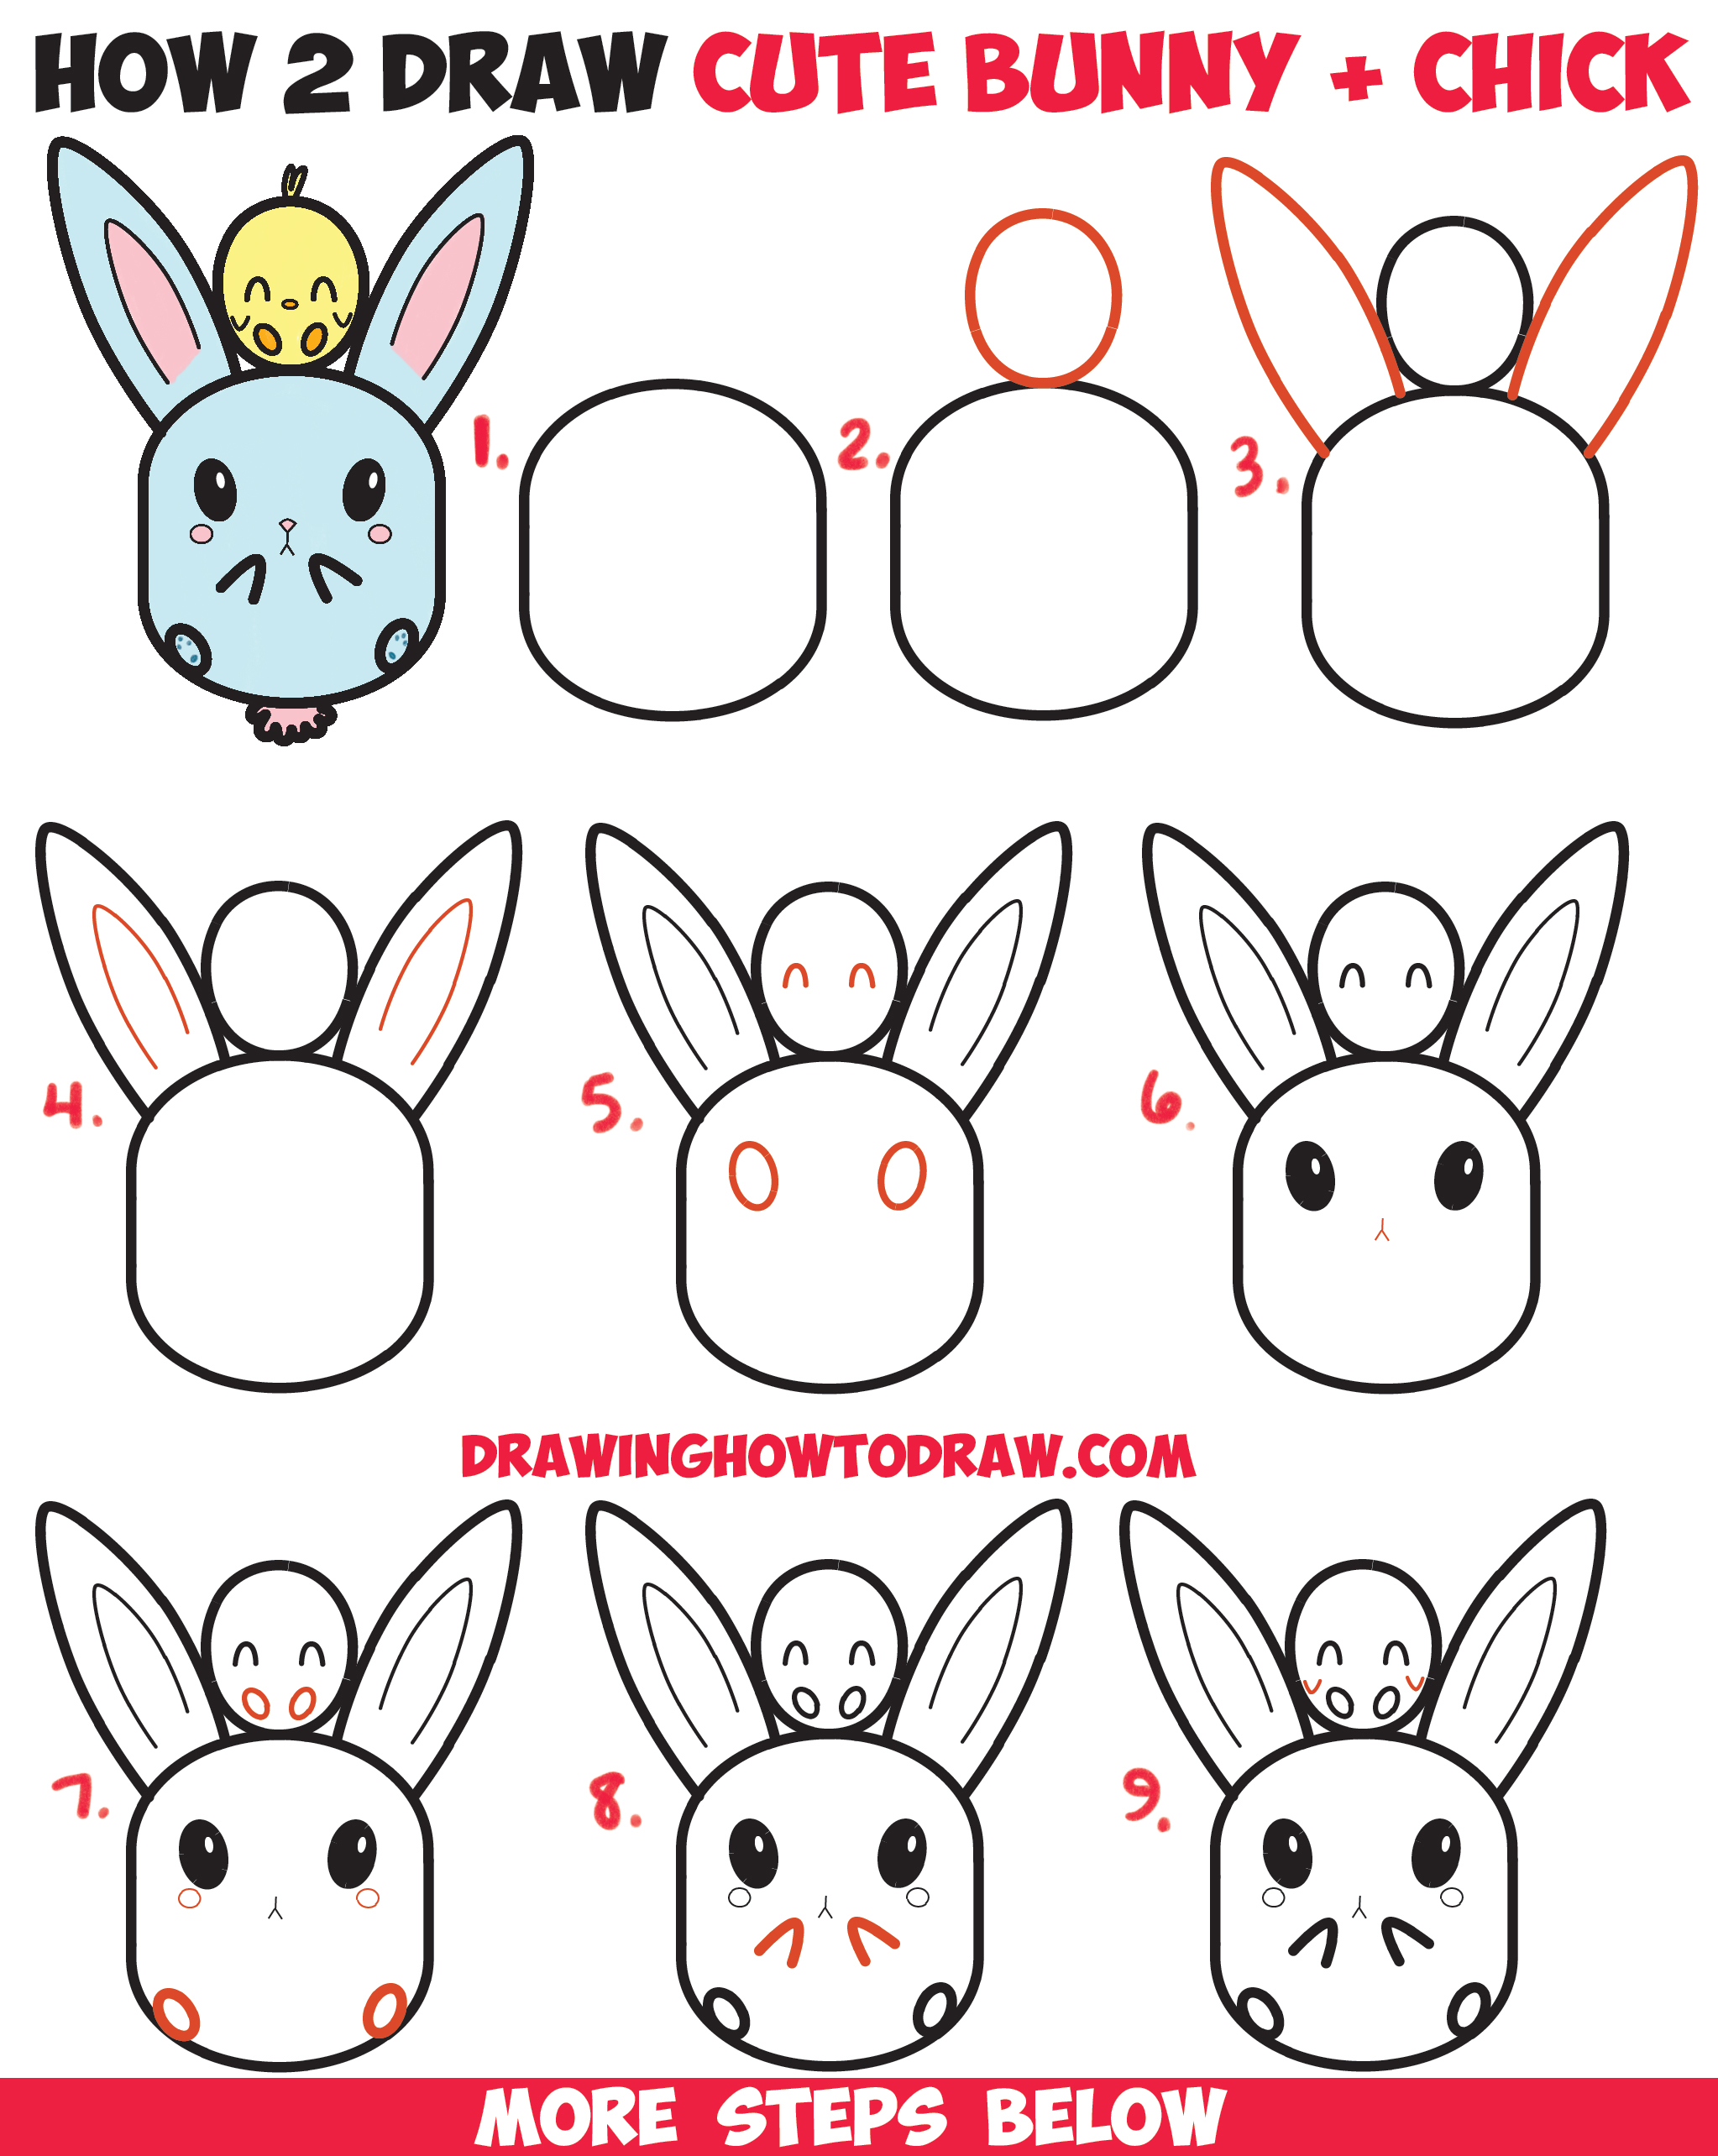 How to Draw Cute Kawaii / Chibi Bunny Rabbit and Baby Chick Easy Step